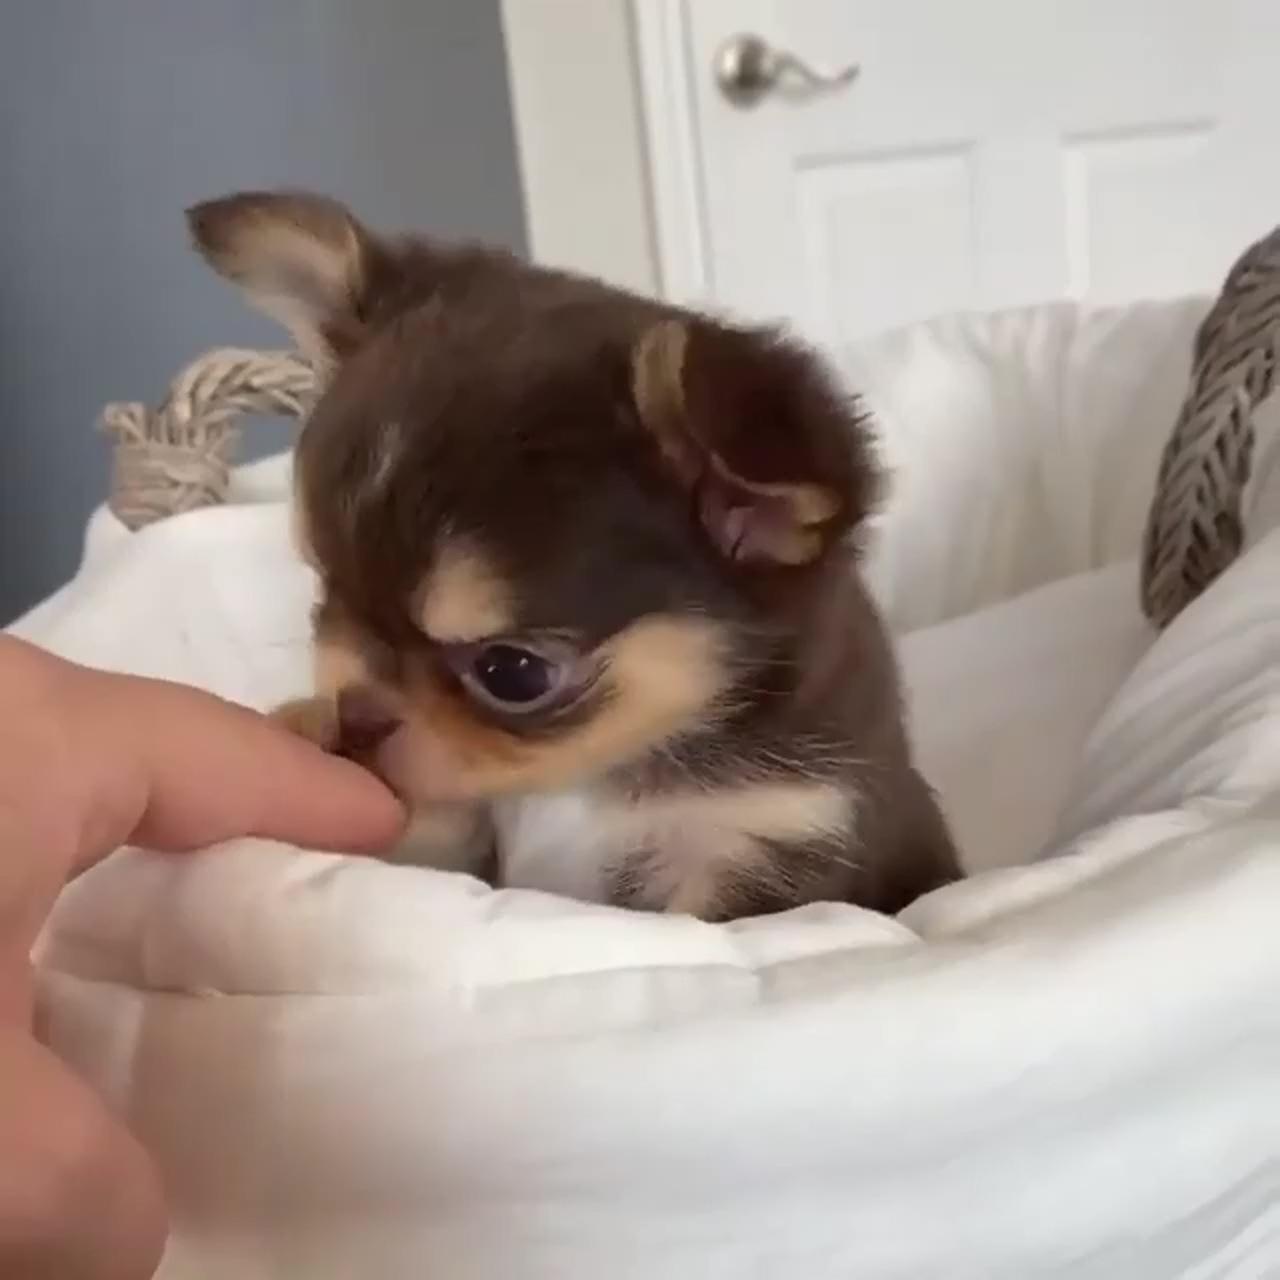 Adorable, look at those tiny puppy eyes; so cute